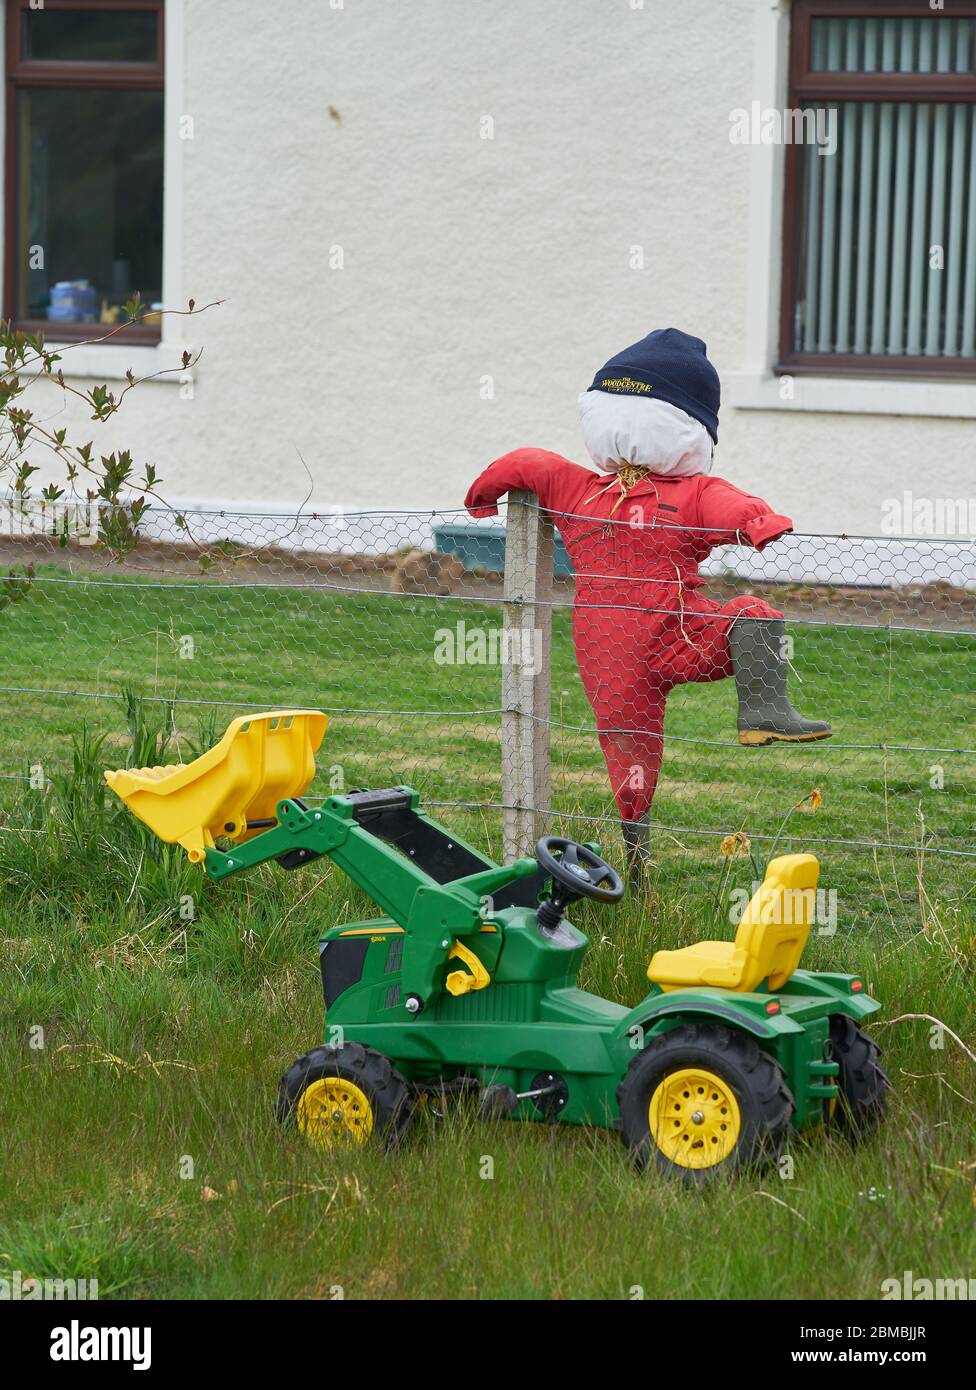 Scarecrow Competition. Dallas, Moray, UK. 8th May, 2020. UK. This is examples of Scarecrows within the village of Dallas in Scotland. This is provide entertainment during the COVID-19 Lockdown. Credit: JASPERIMAGE/Alamy Live News Stock Photo